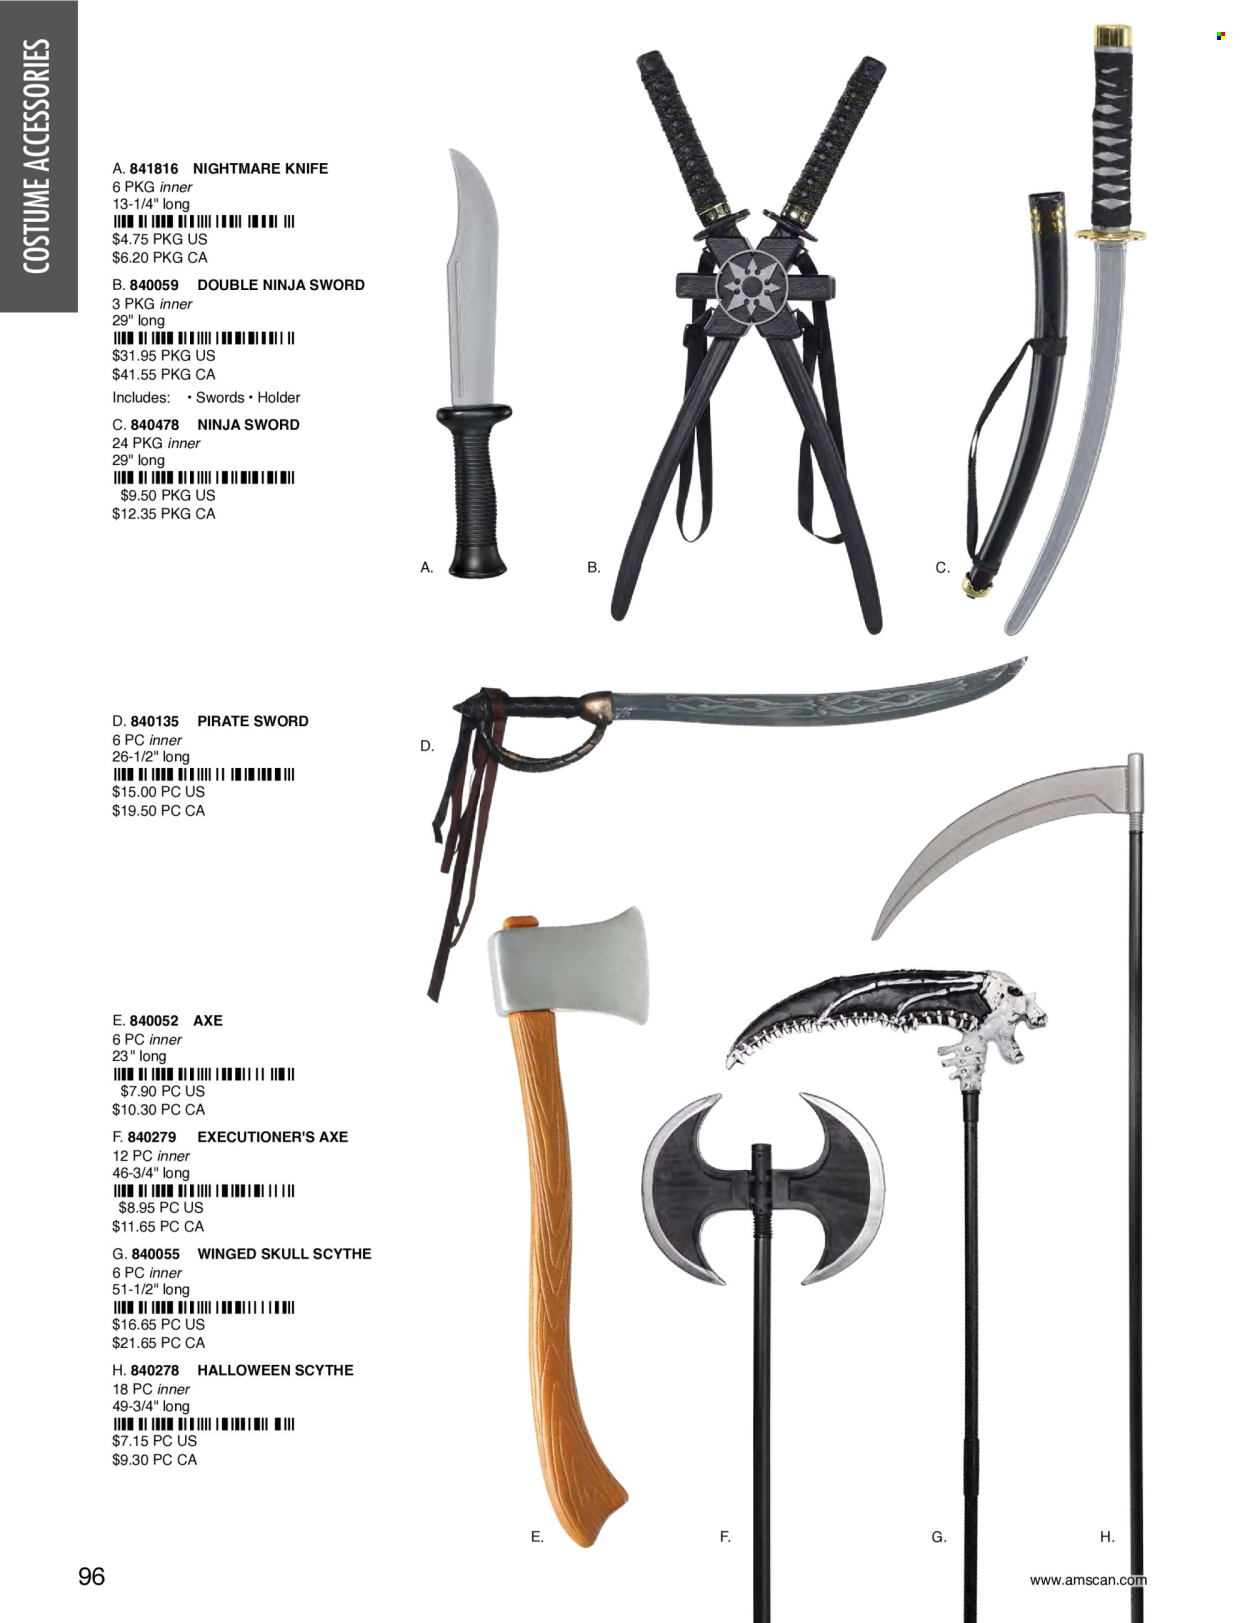 thumbnail - Amscan Flyer - Sales products - knife, holder, Halloween, costume. Page 99.